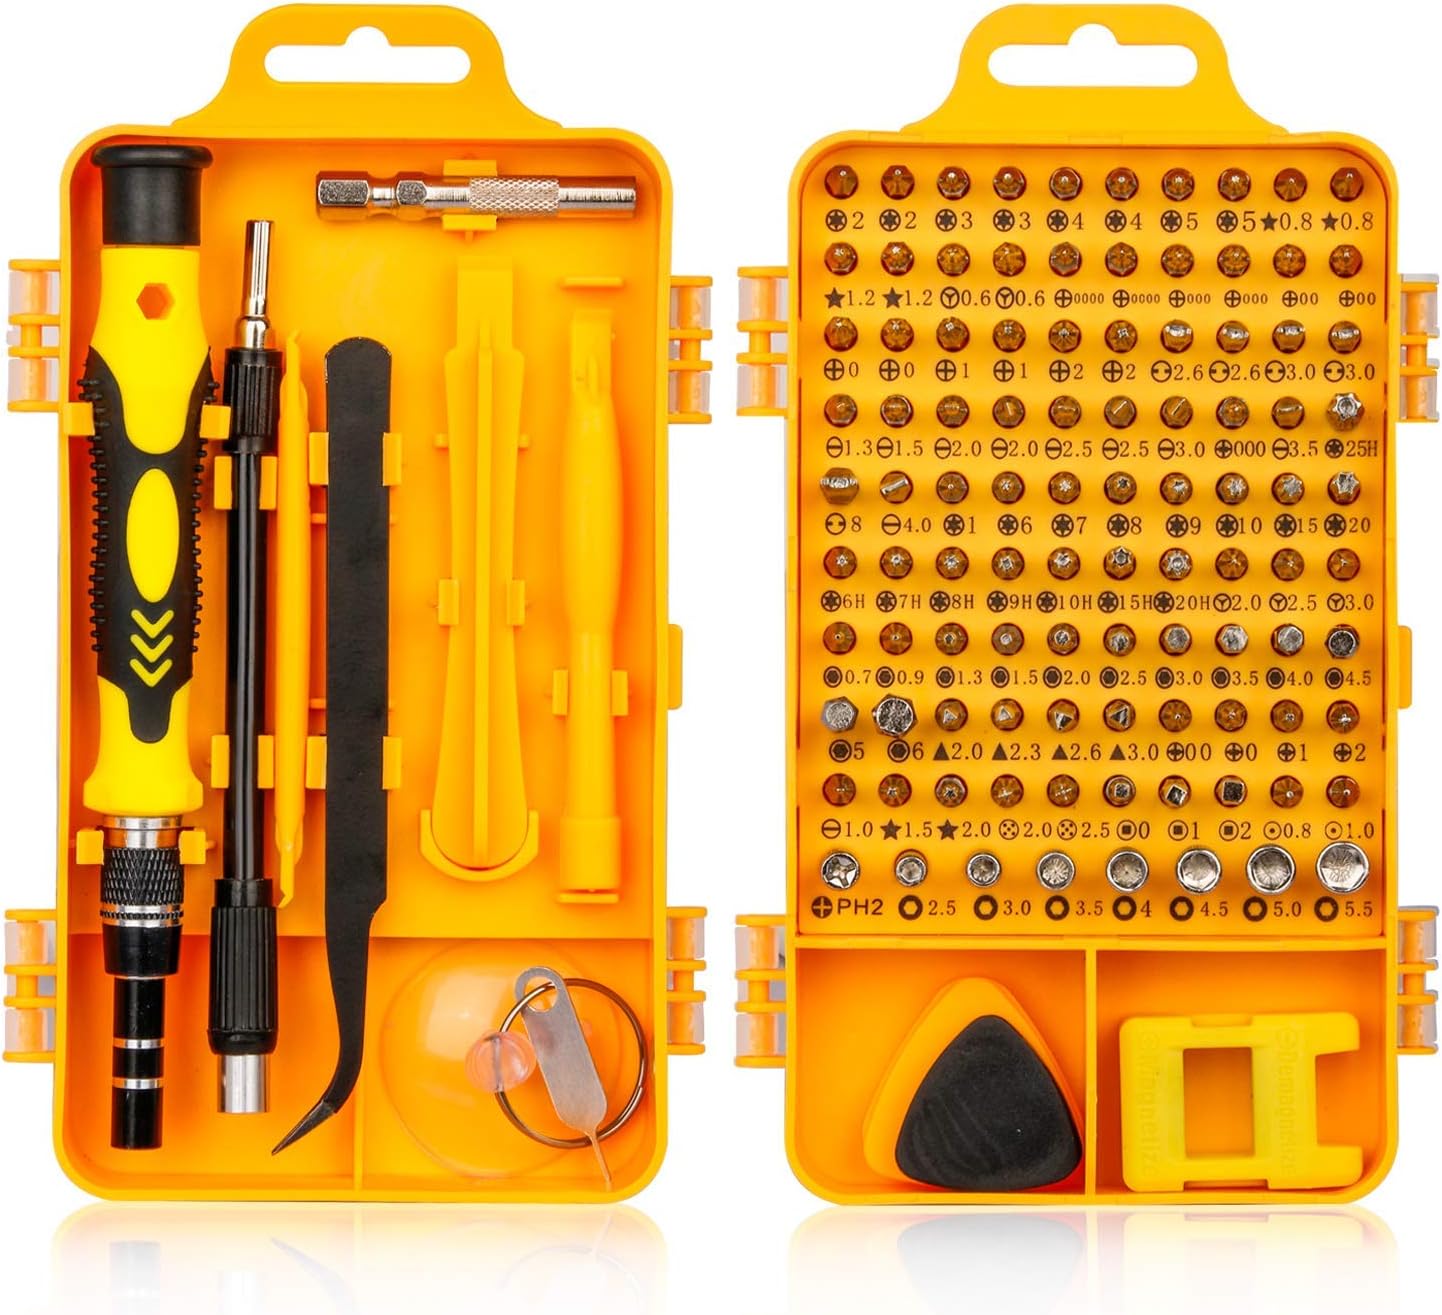 Precision Screwdriver Set, Fomatrade 115 in 1 Professional Screwdriver Set, Multi-function Magnetic Repair Computer Tool Kit Compatible with iPhone/Ipad/Android/Laptop/PC etc (Yellow) (Yellow)